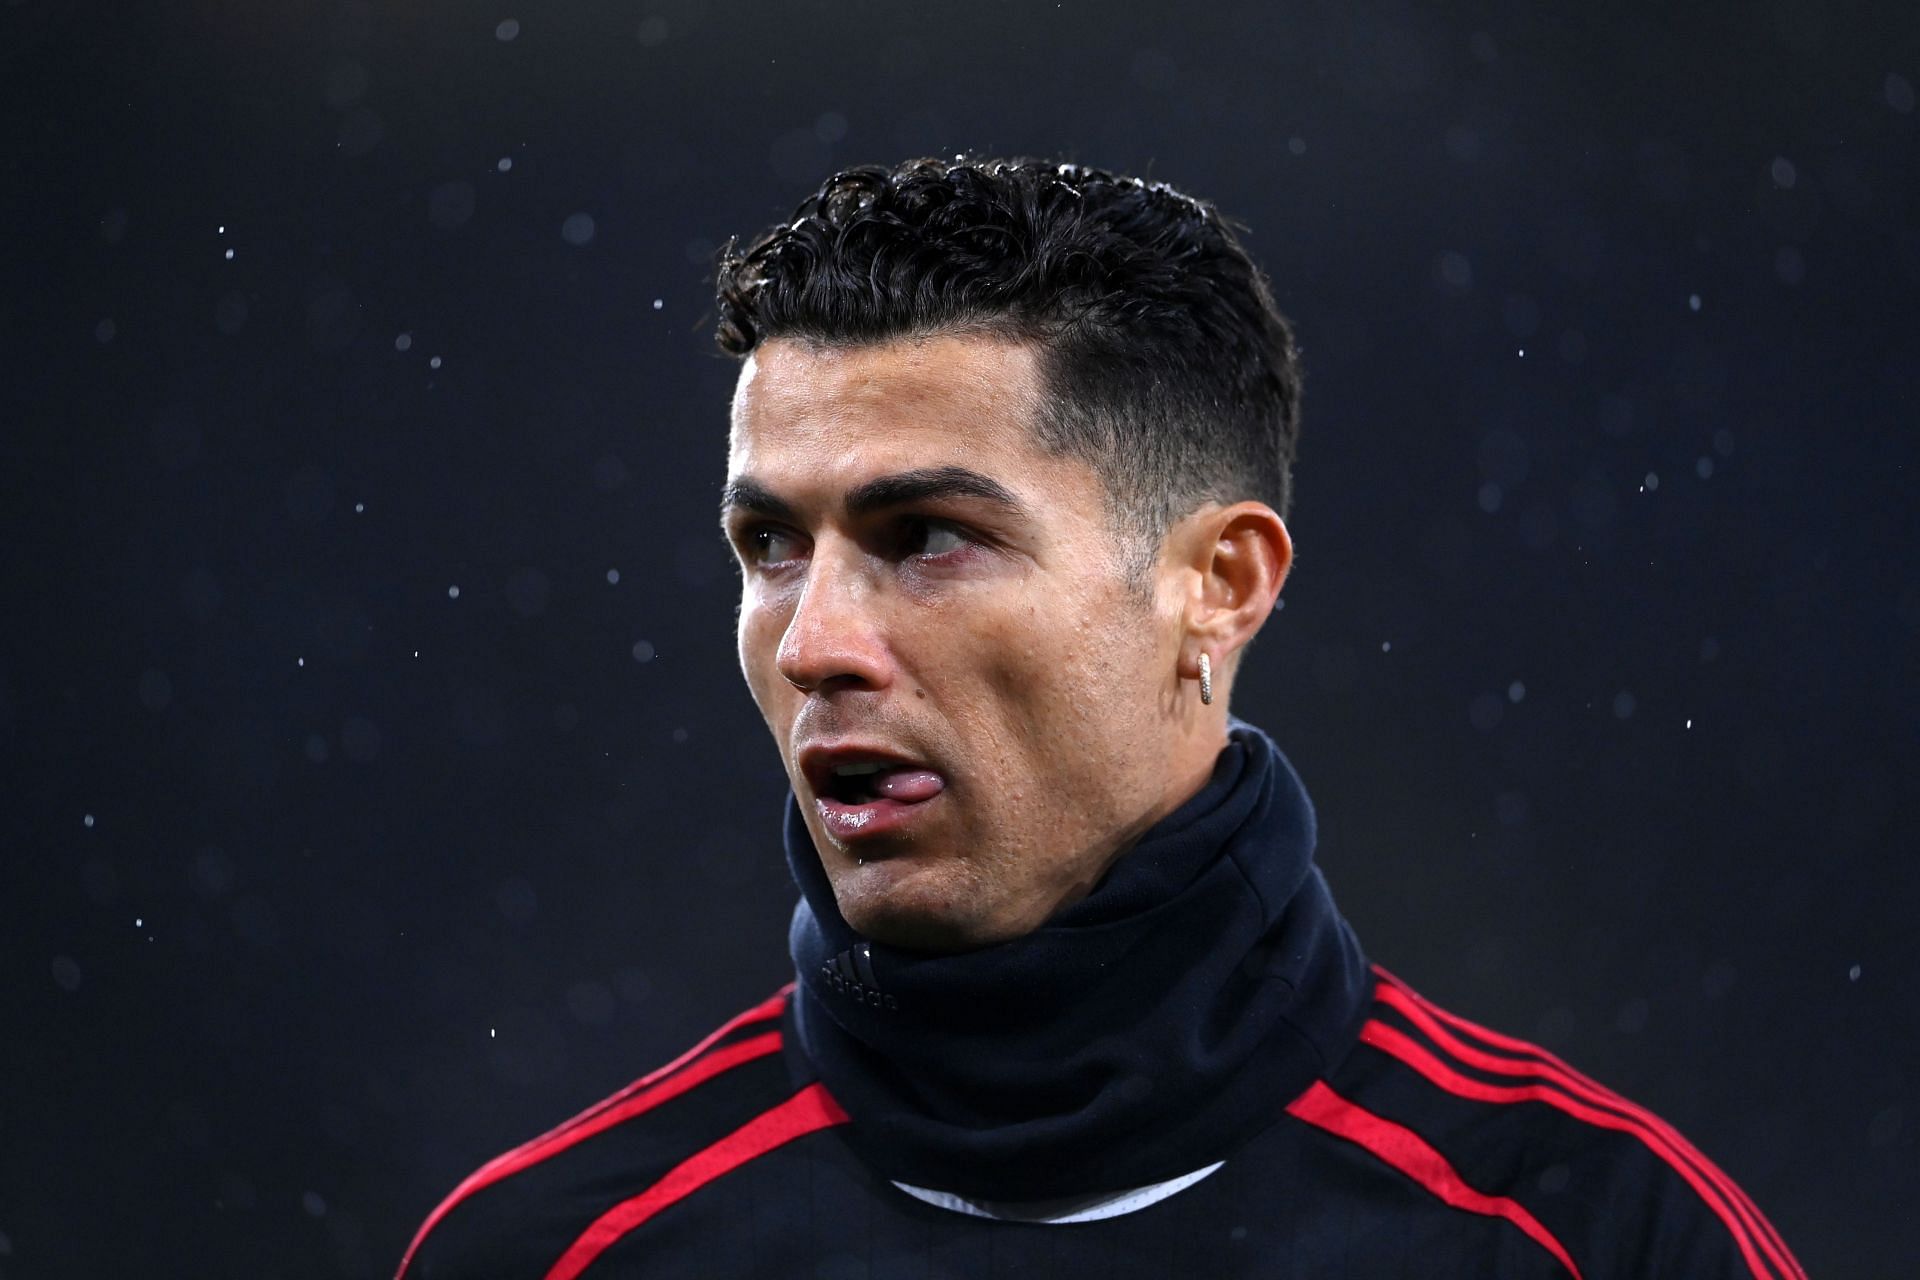 Is Cristiano Ronaldo playing for Manchester United against Liverpool